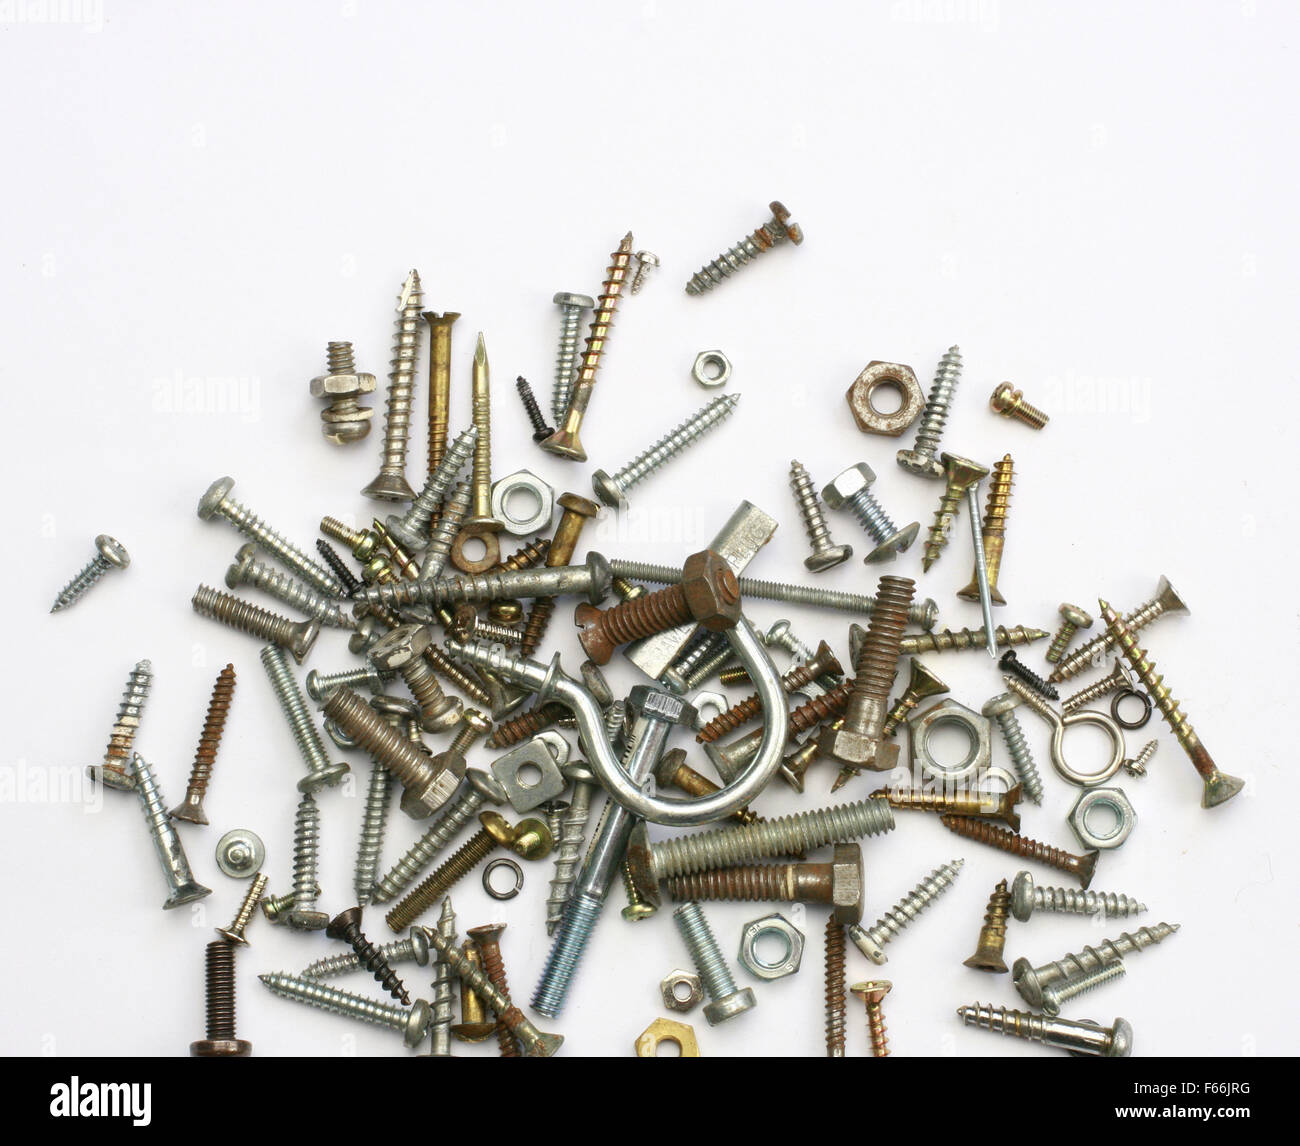 A pile of nuts,bolts, screws and other fasteners on a white background Stock Photo